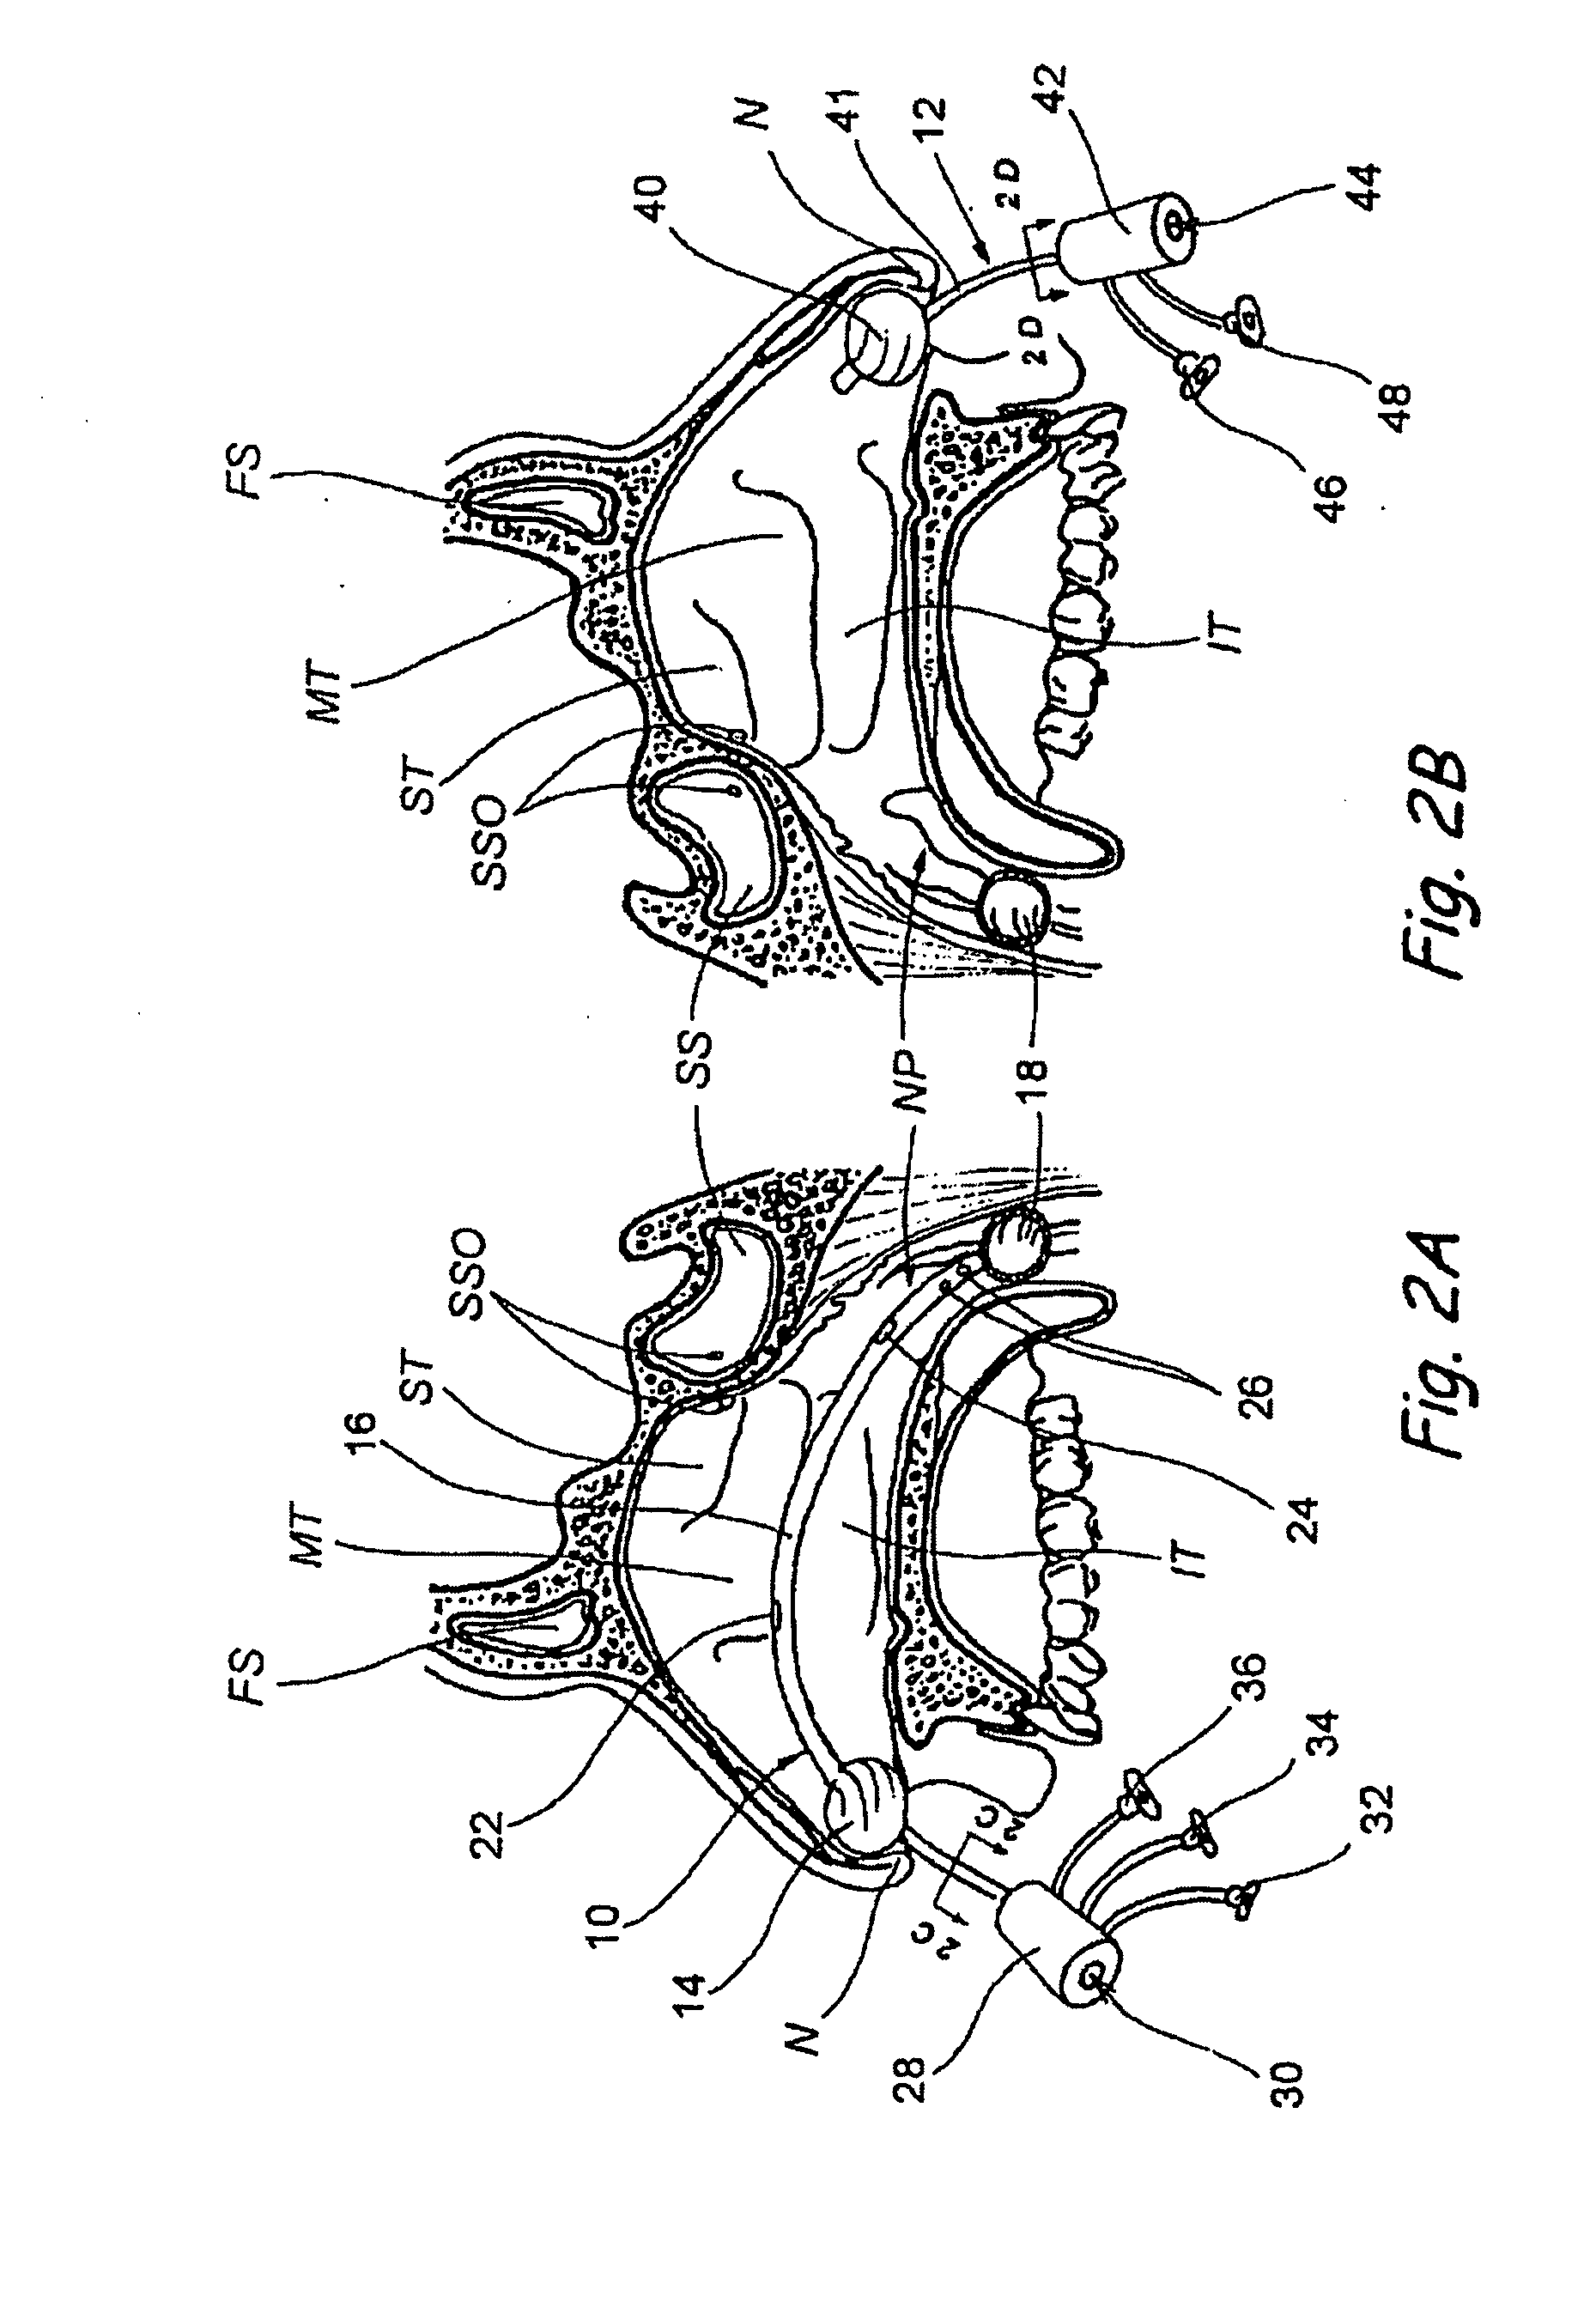 Devices, systems and methods for diagnosing and treating sinusitis and other disorders of the ears, nose and/or throat